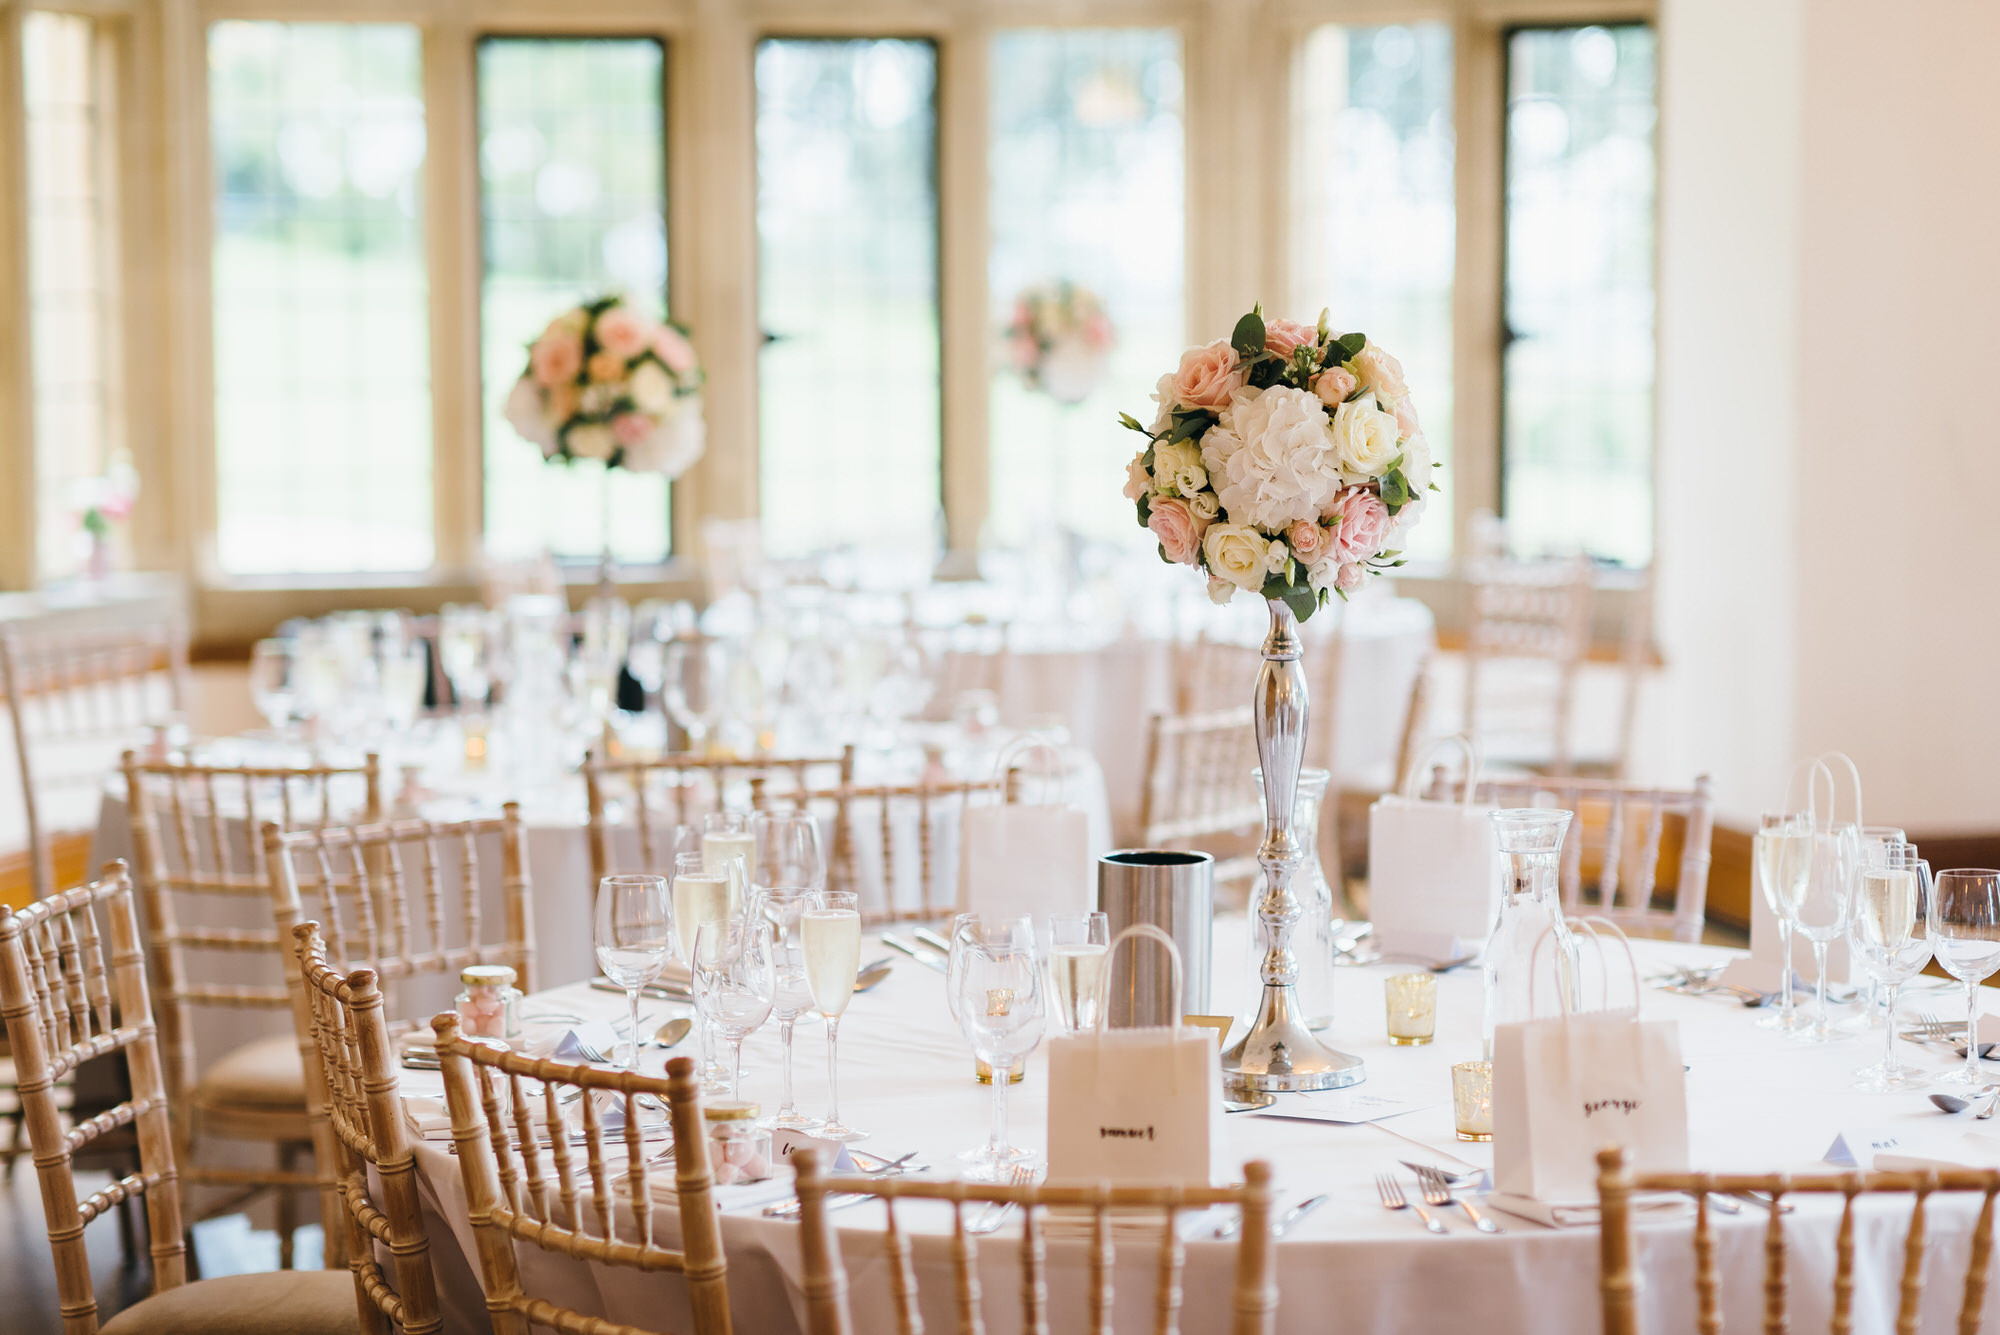 Coombe Lodge wedding breakfast tables